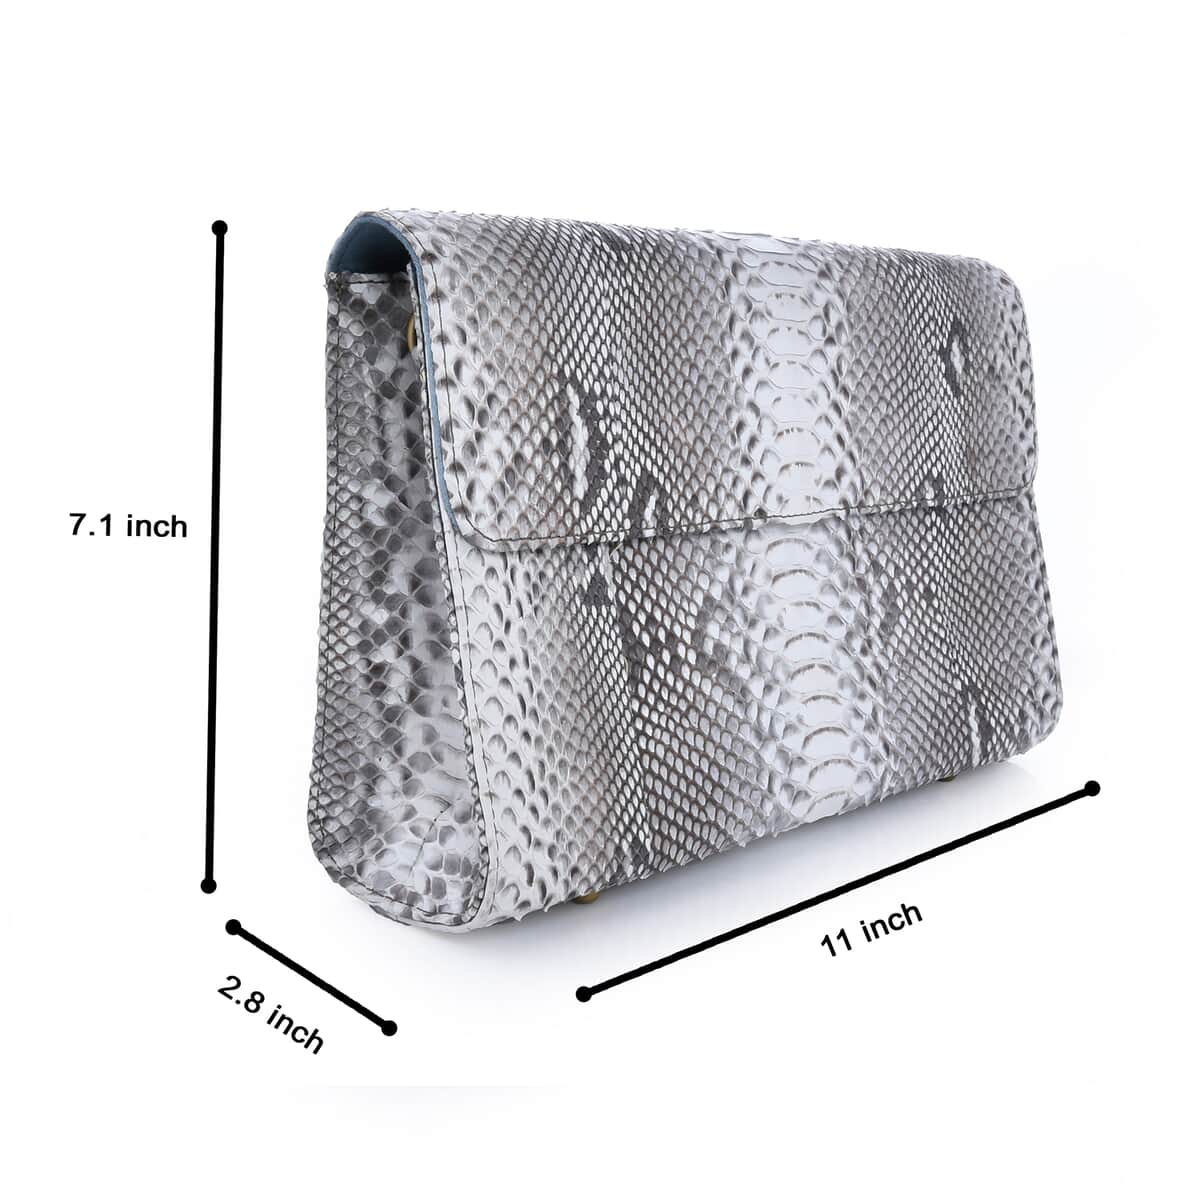 The Pelle Collection Natural Python Leather Evening Clutch Bag with Detachable Strap, Clutches for Women, Leather Handbag, Clutch Purse image number 6